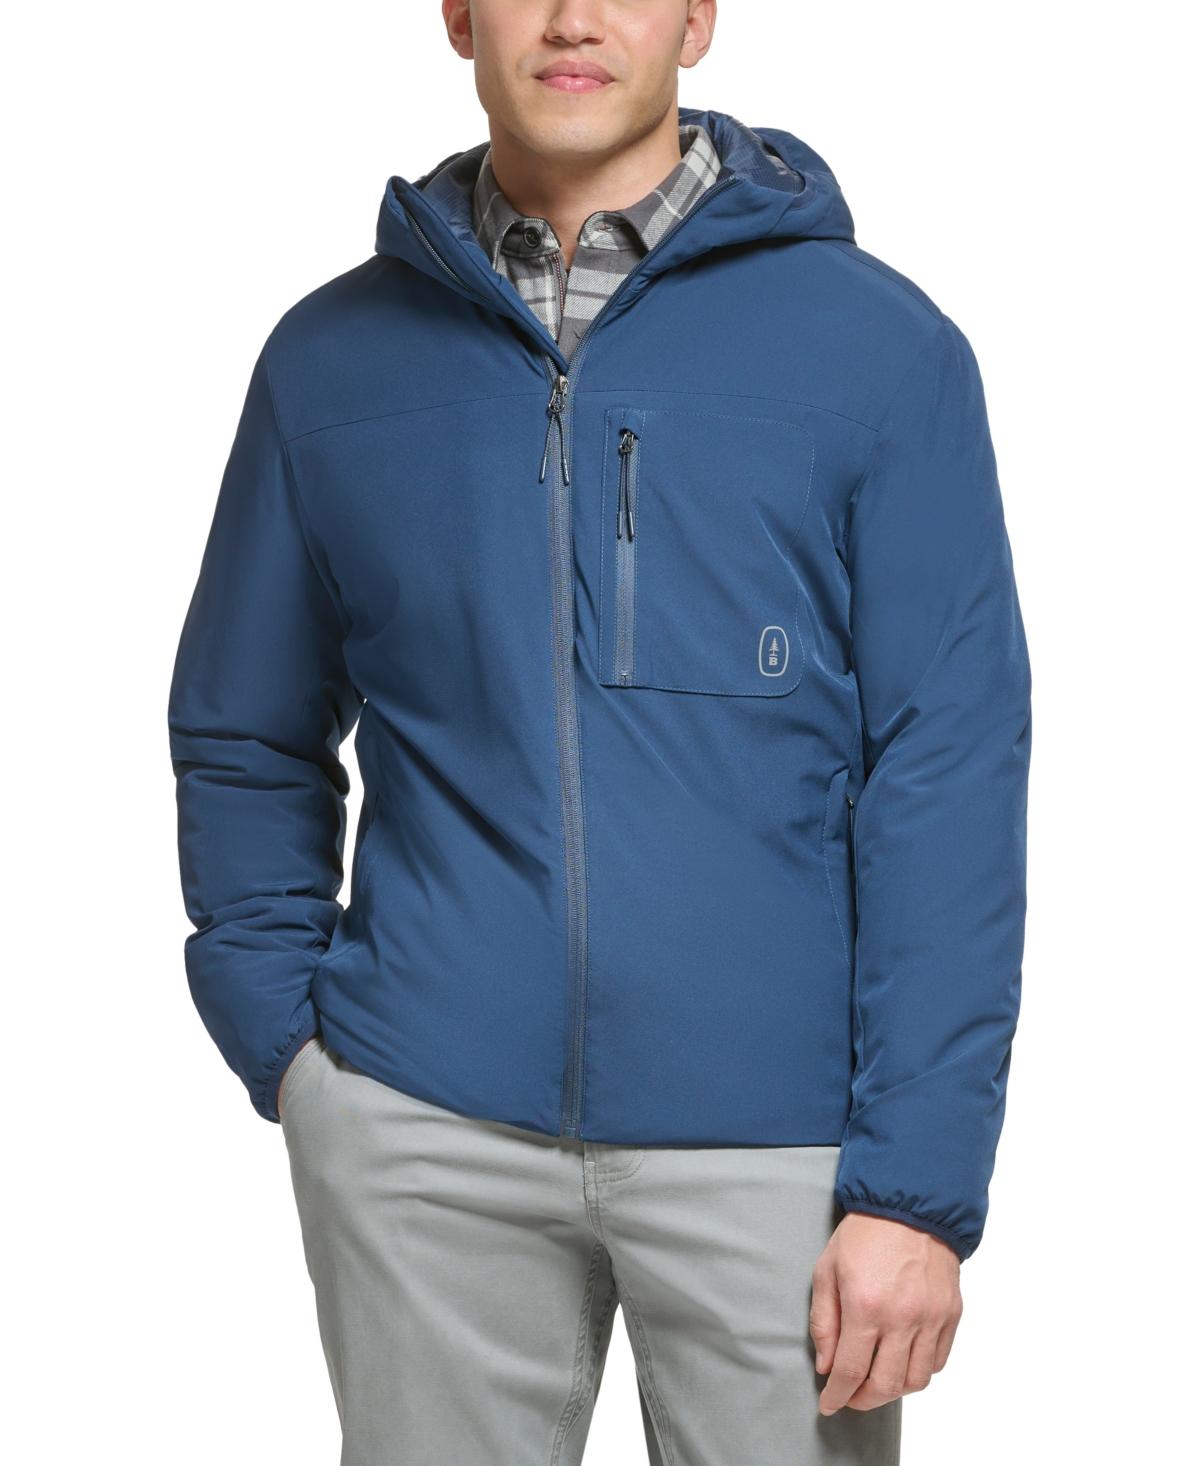 BASS OUTDOOR Performance Hooded Jacket in Blue for Men